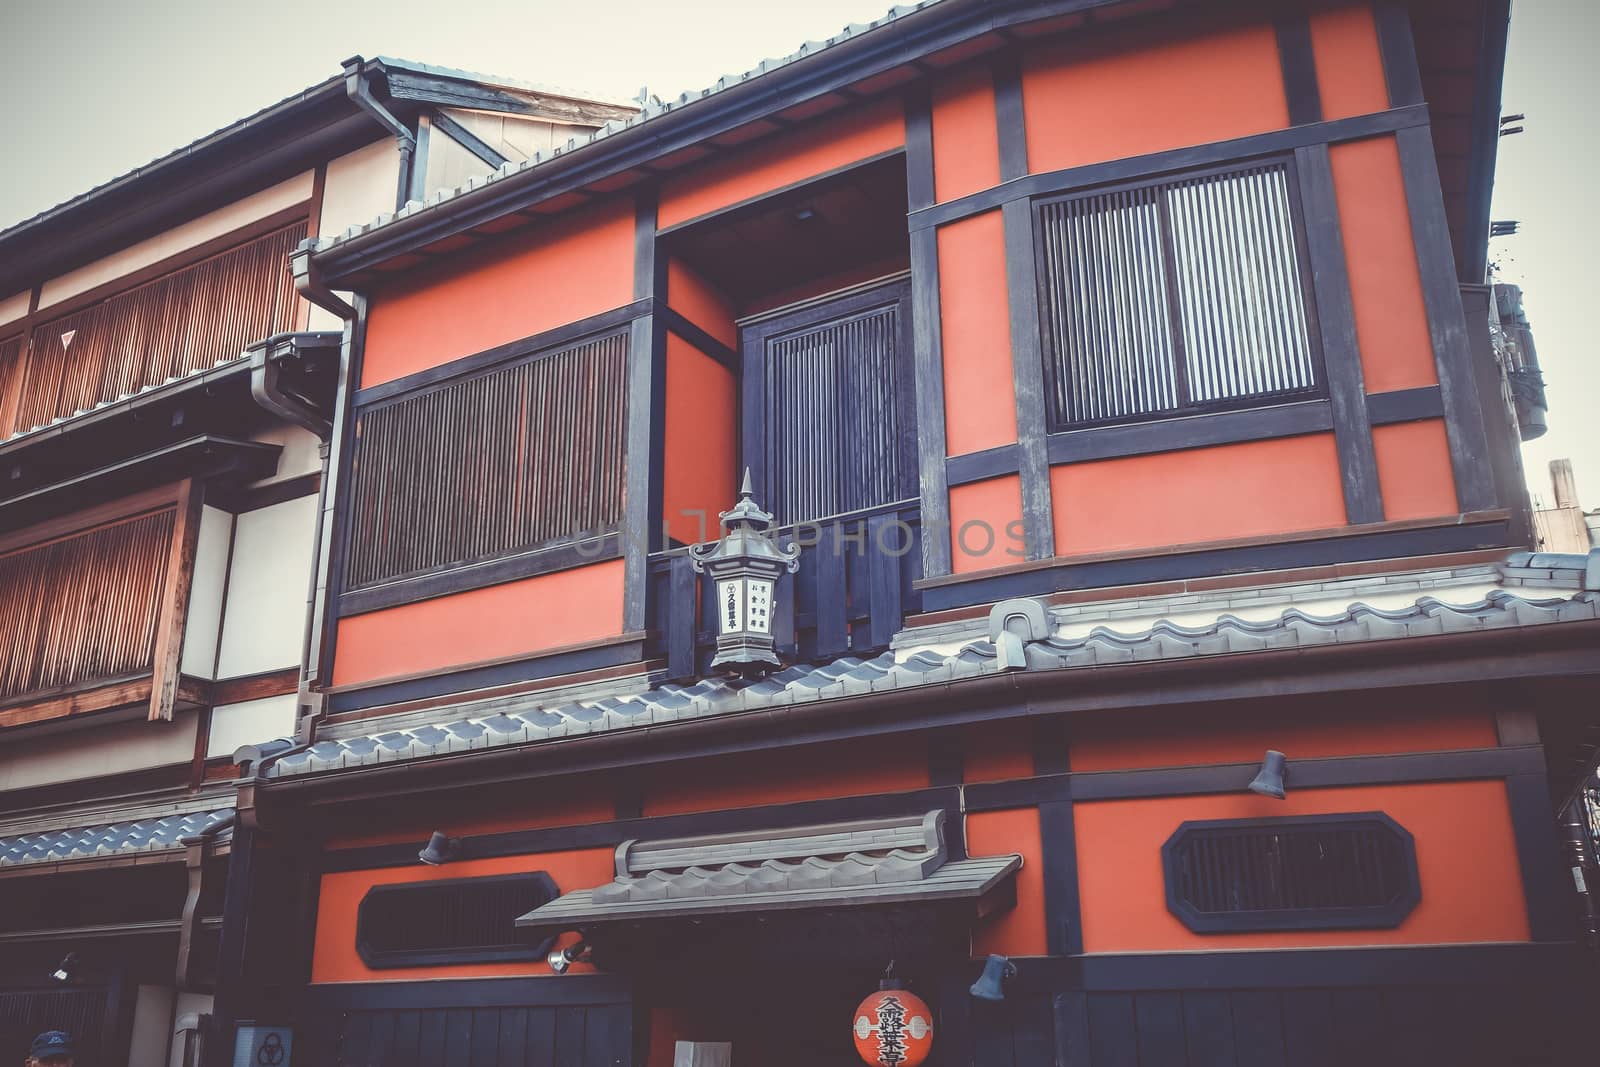 Traditional japanese houses, Gion district, Kyoto, Japan by daboost